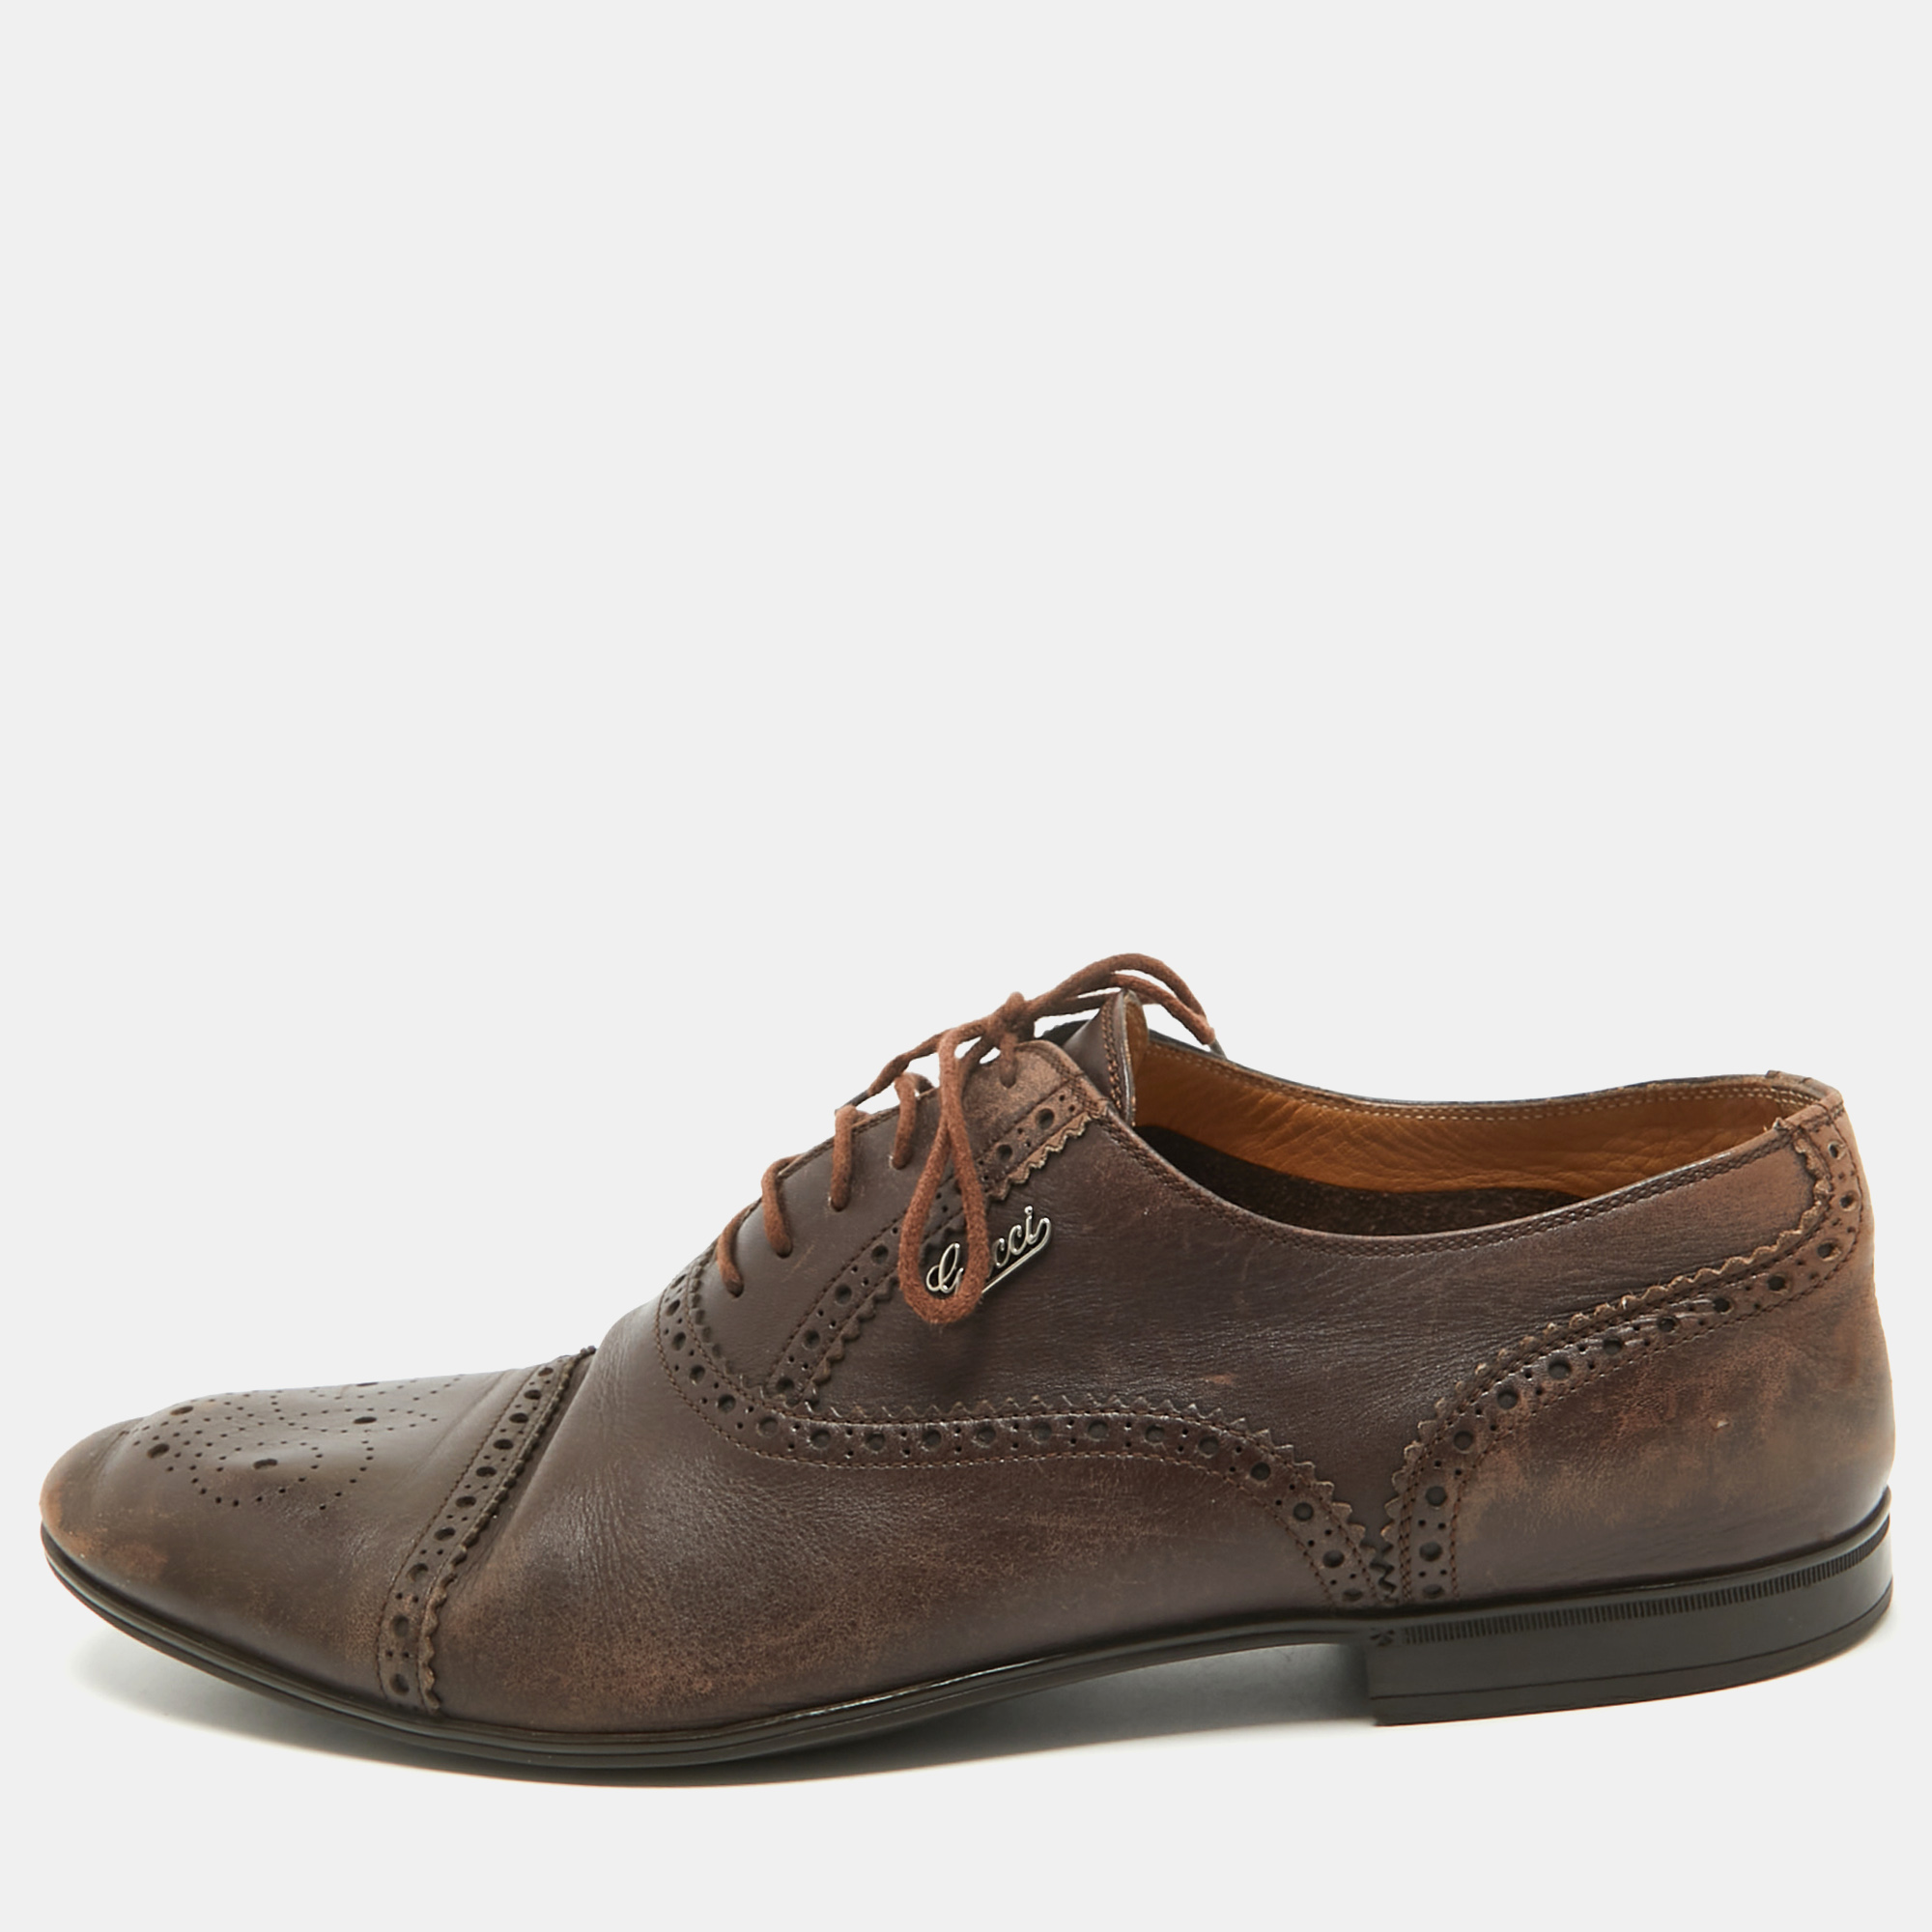 

Gucci Brown Leather Lace Up Brogue Oxfords Size 44.5